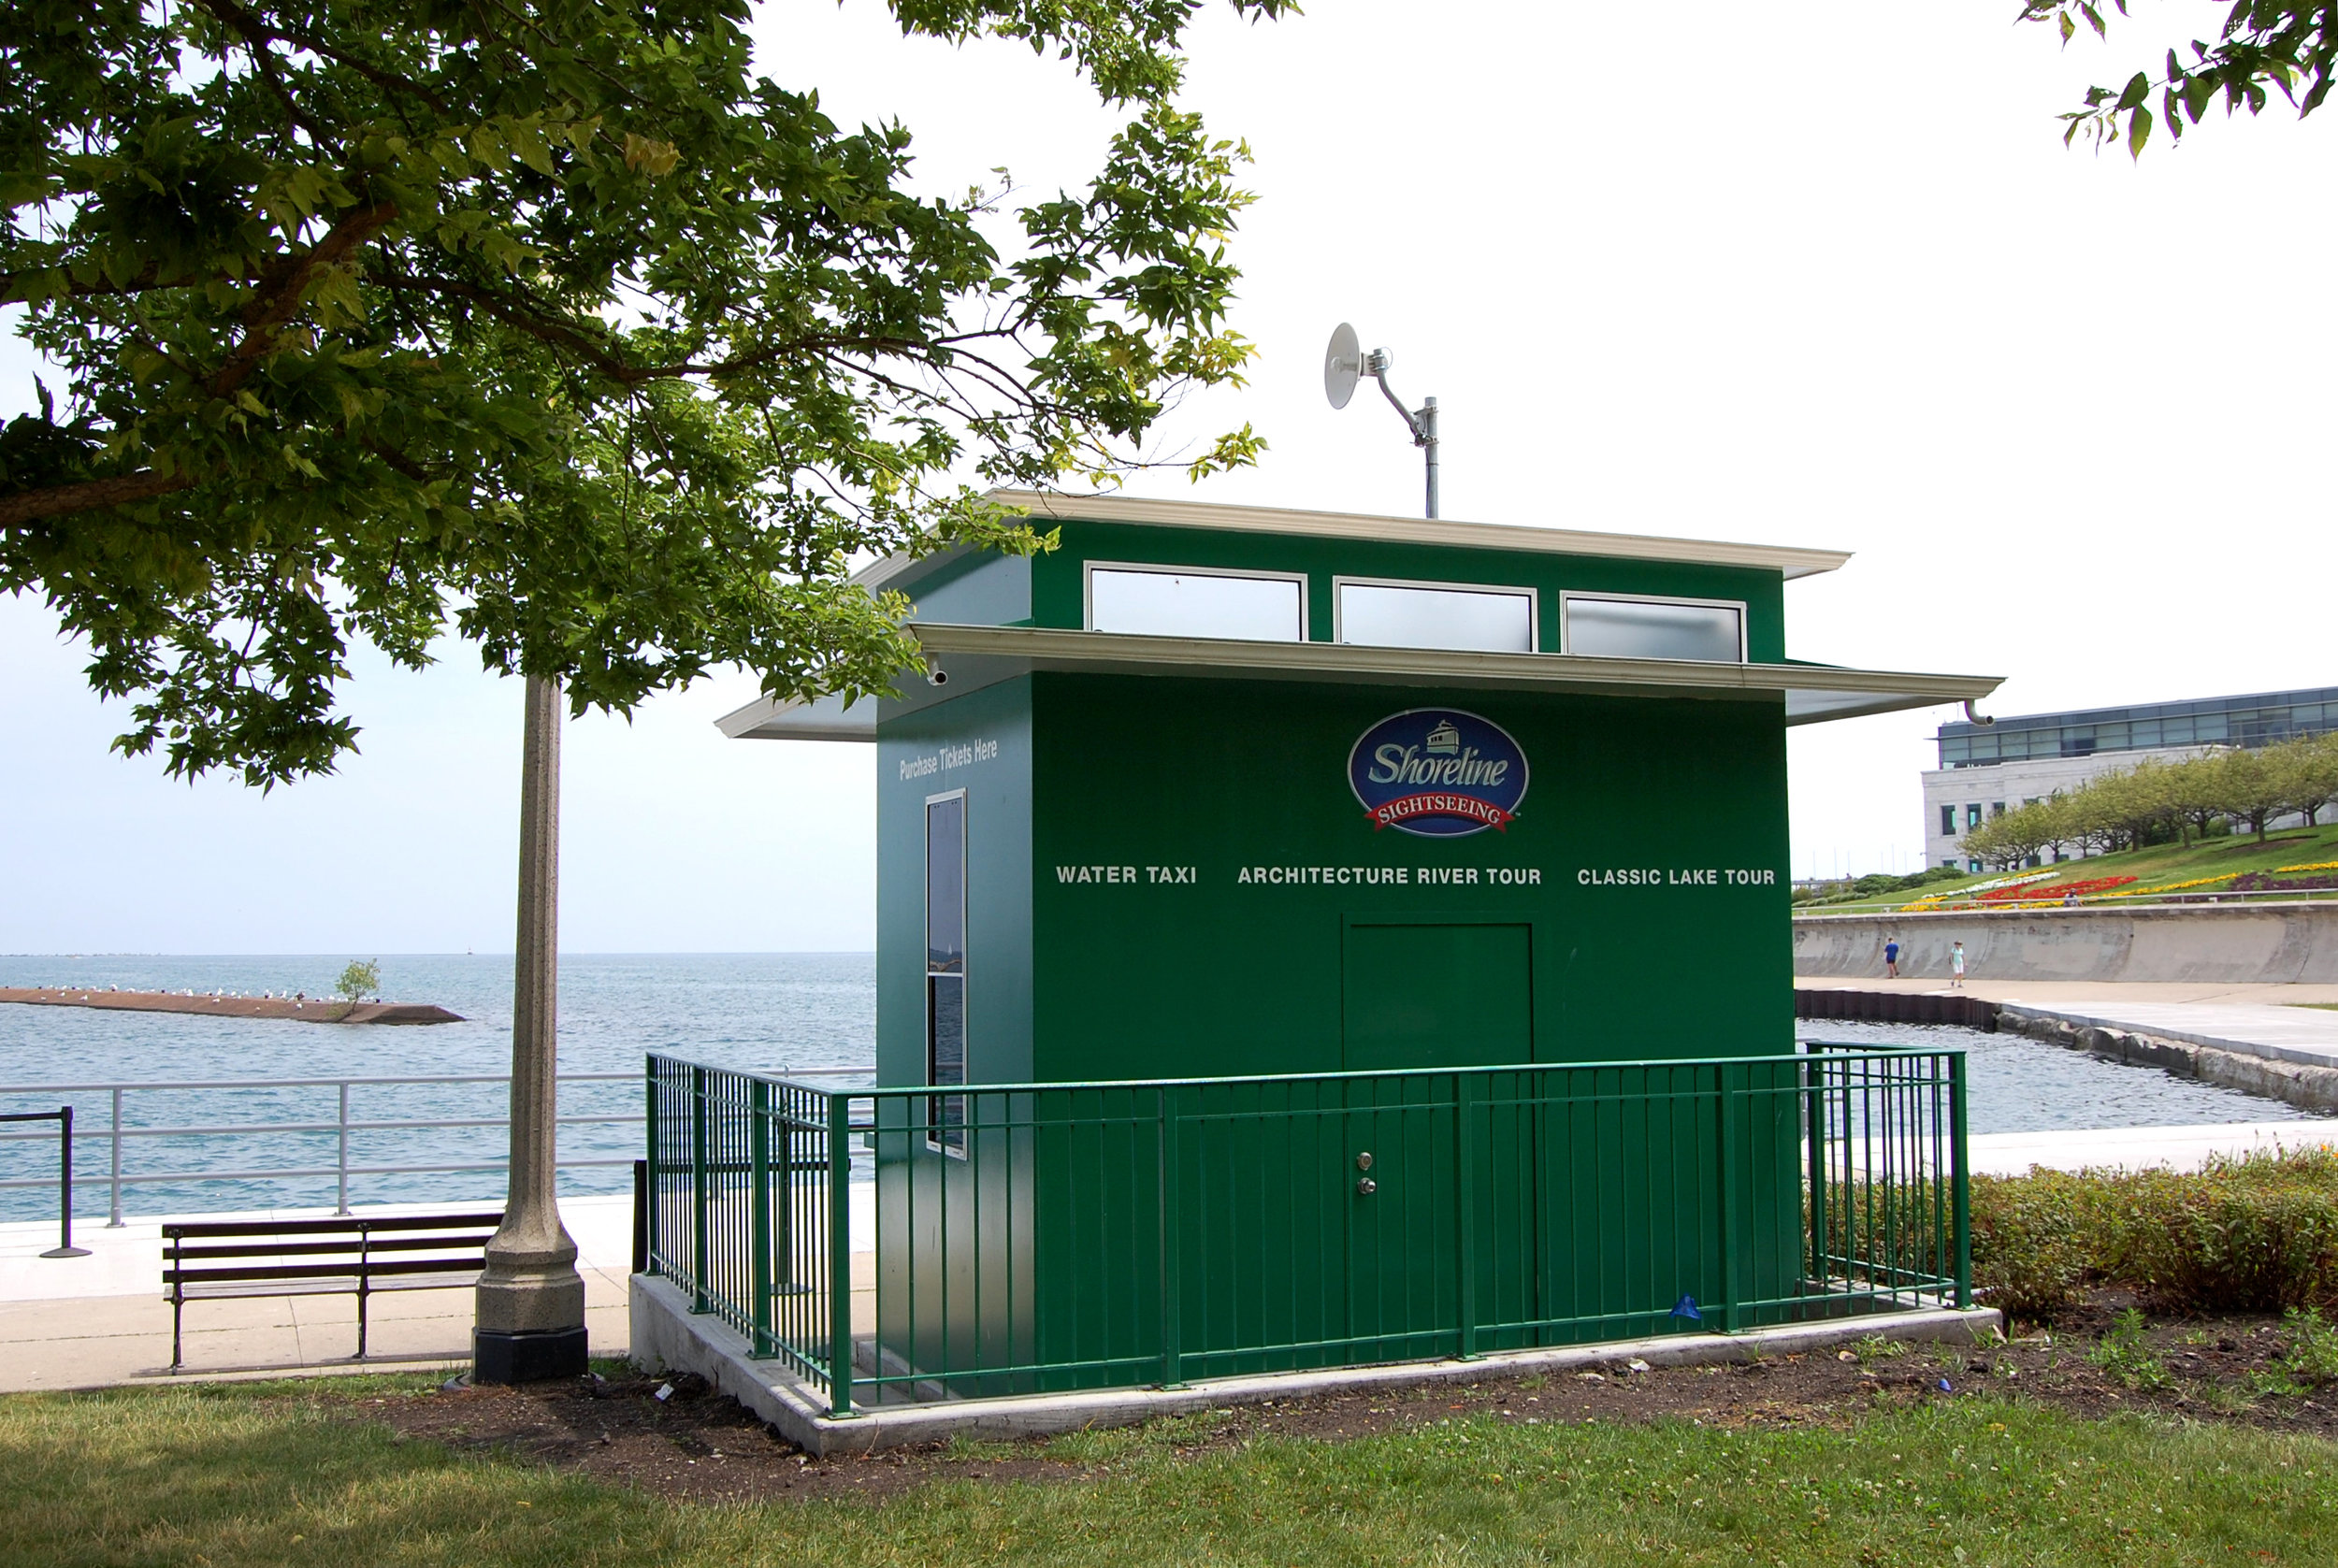 custom new construction commercial design ticket booth all-metal construction contextual design museum campus park structure architectural boat tour Lake Michigan waterfront lakefront water taxi